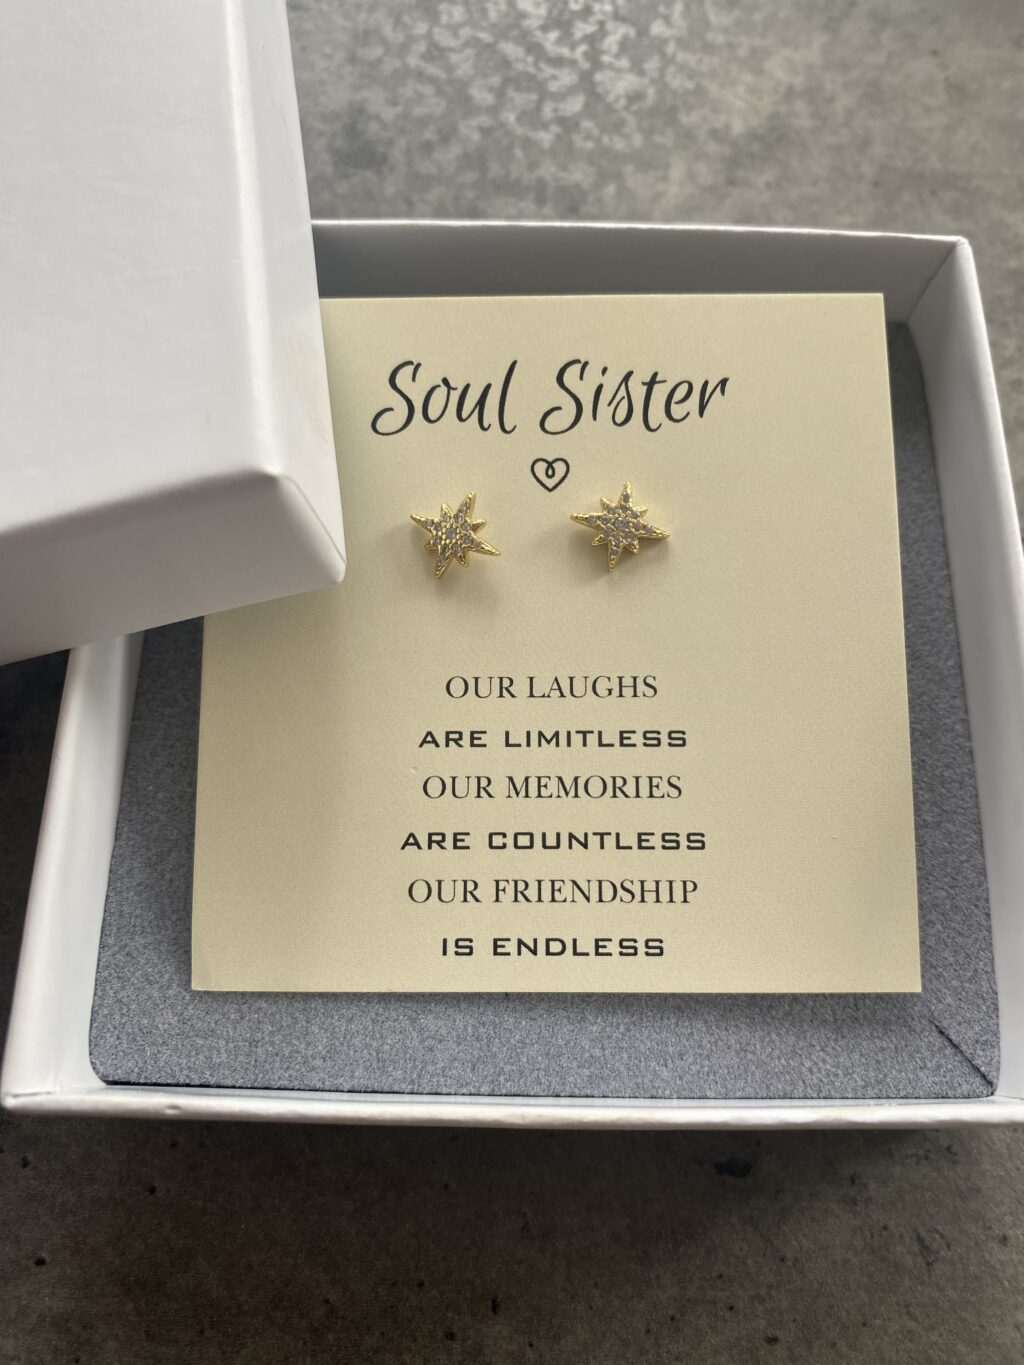 Soul Sister jewelry card